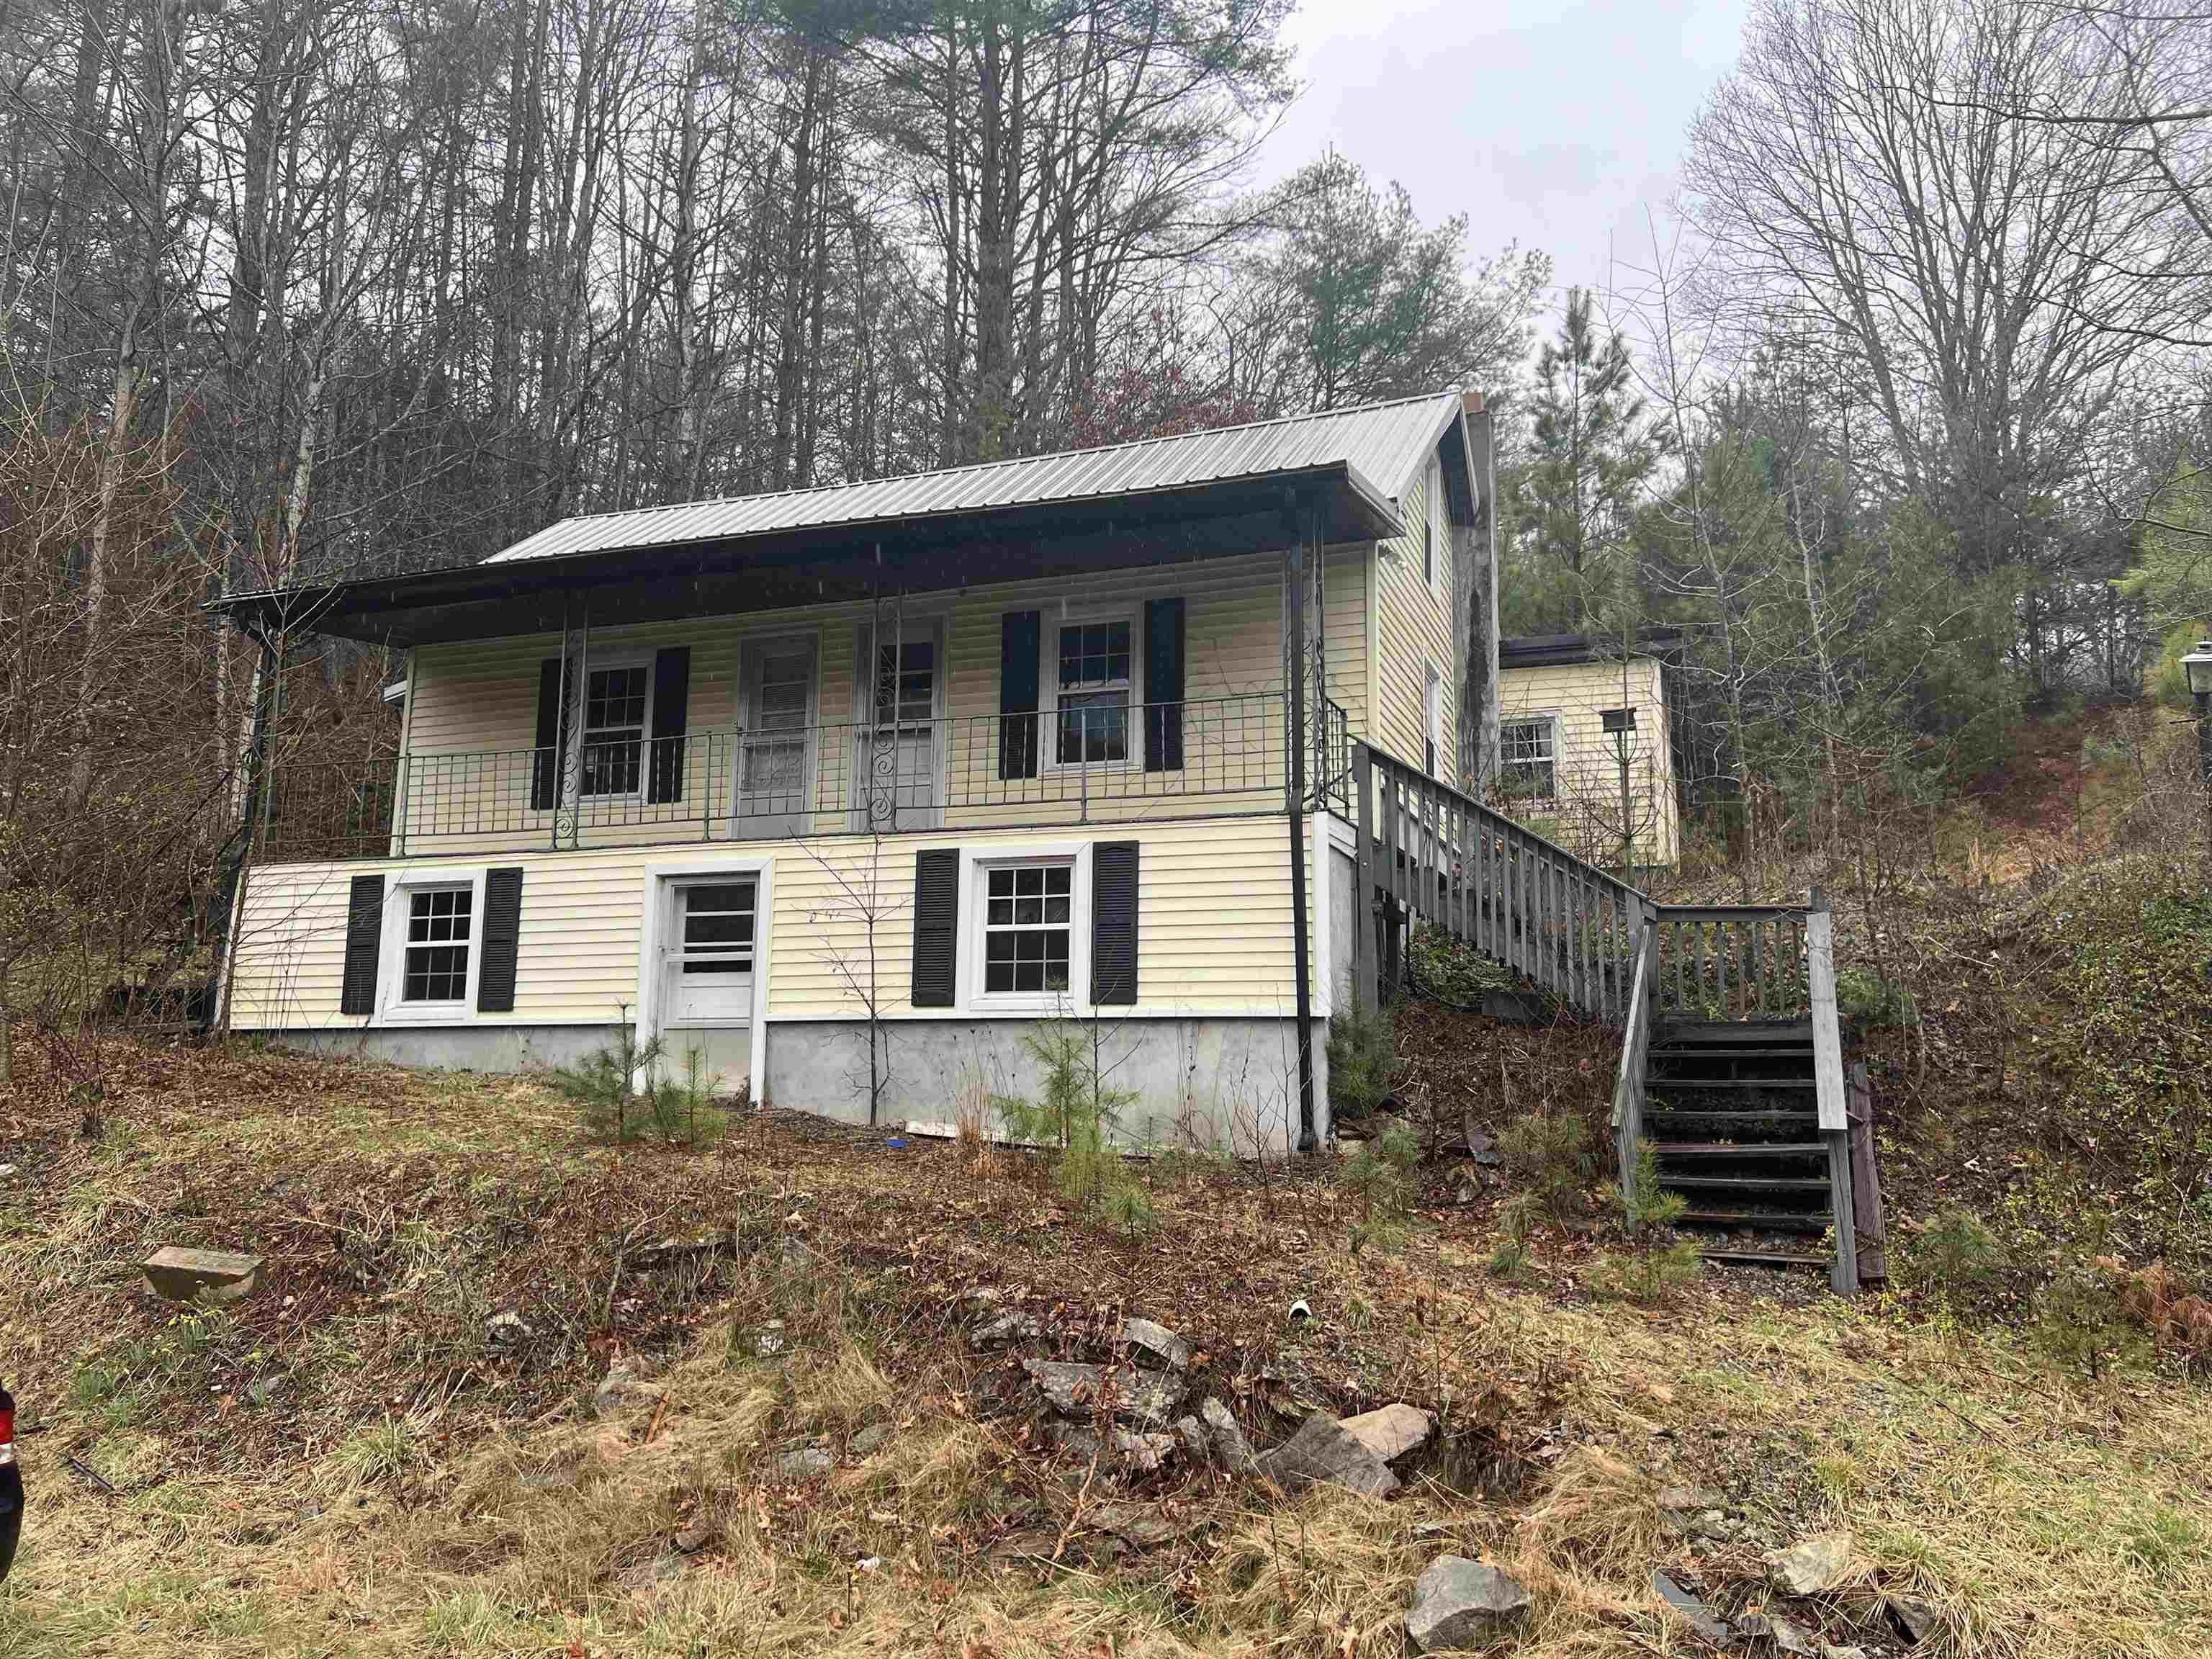 Nice 4 Bedroom 1 Bath Home, sitting on a 1 acre lot. The home has Hardwood Flooring. The kitchen has plenty of cabinets and the bathroom has been updated.